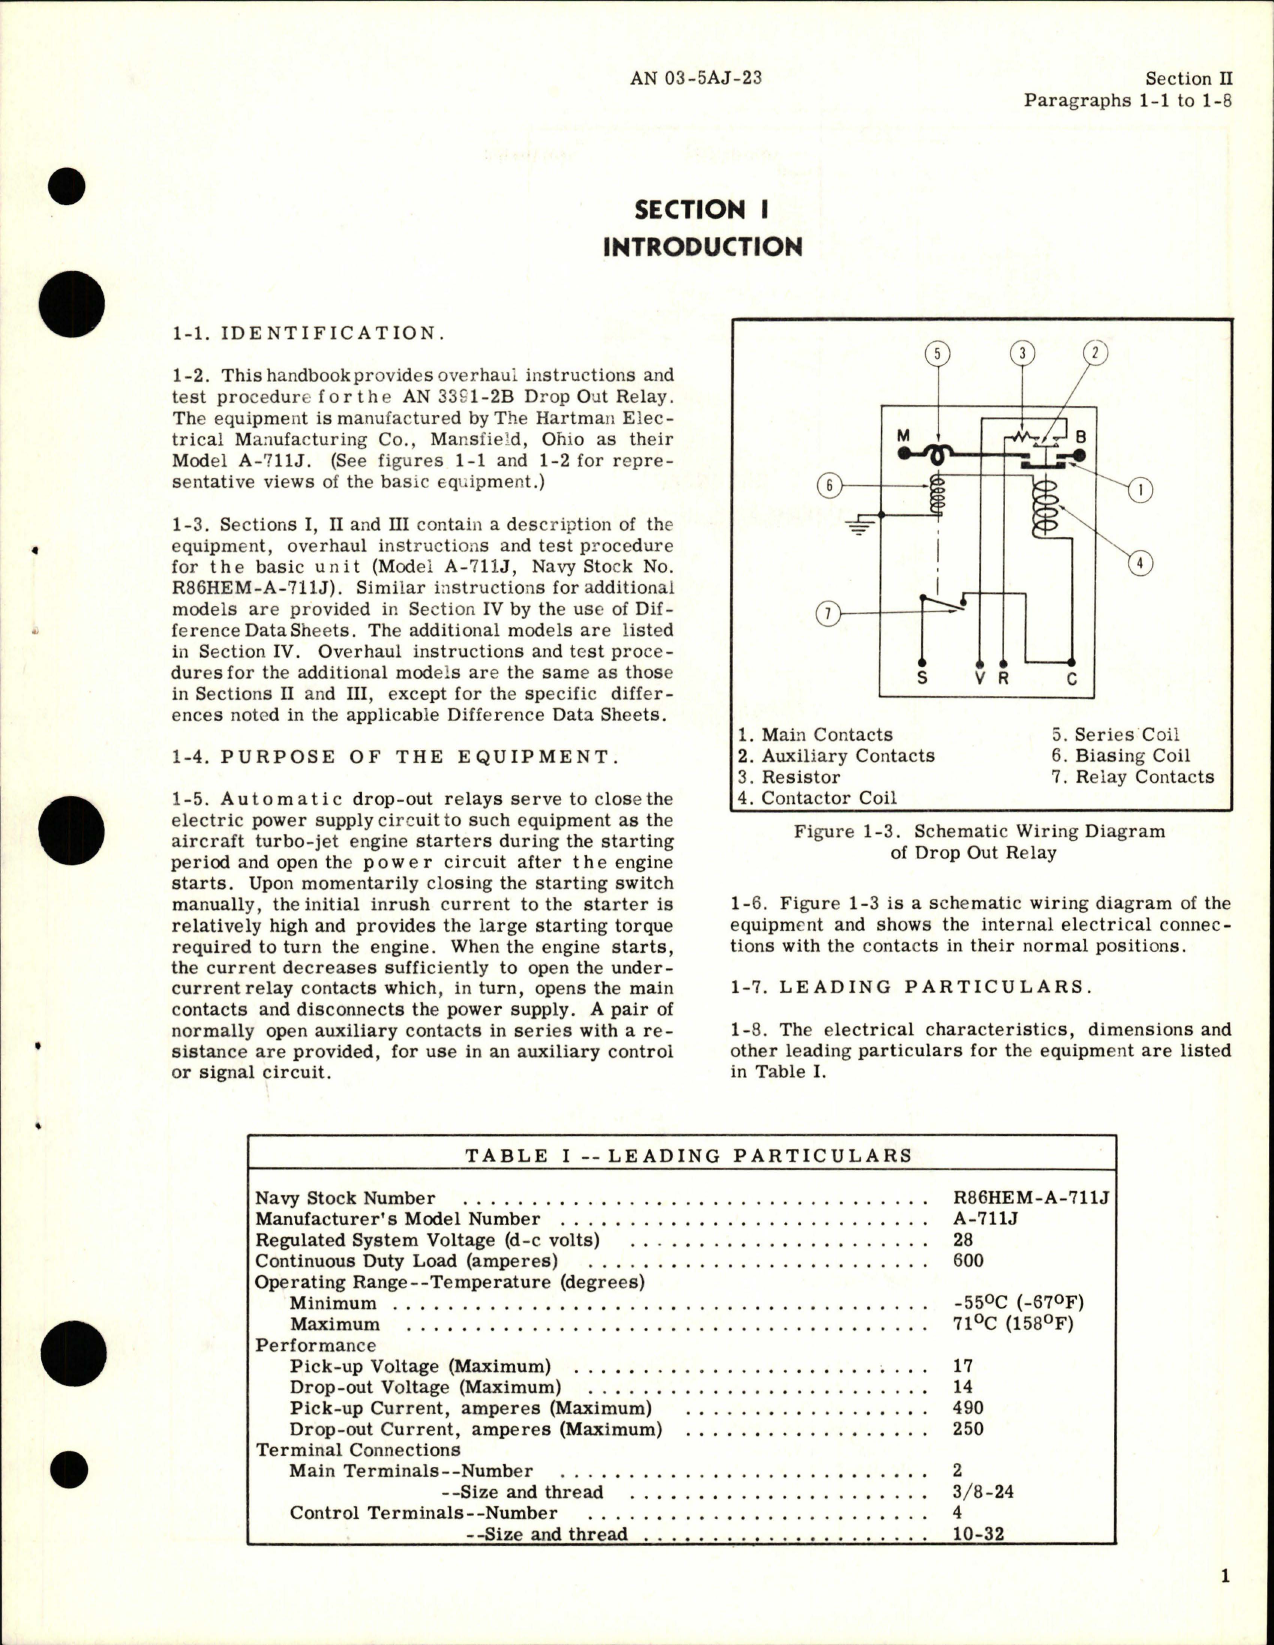 Sample page 5 from AirCorps Library document: Overhaul Instructions for Dropout Relay - Model A-711J and A-711K